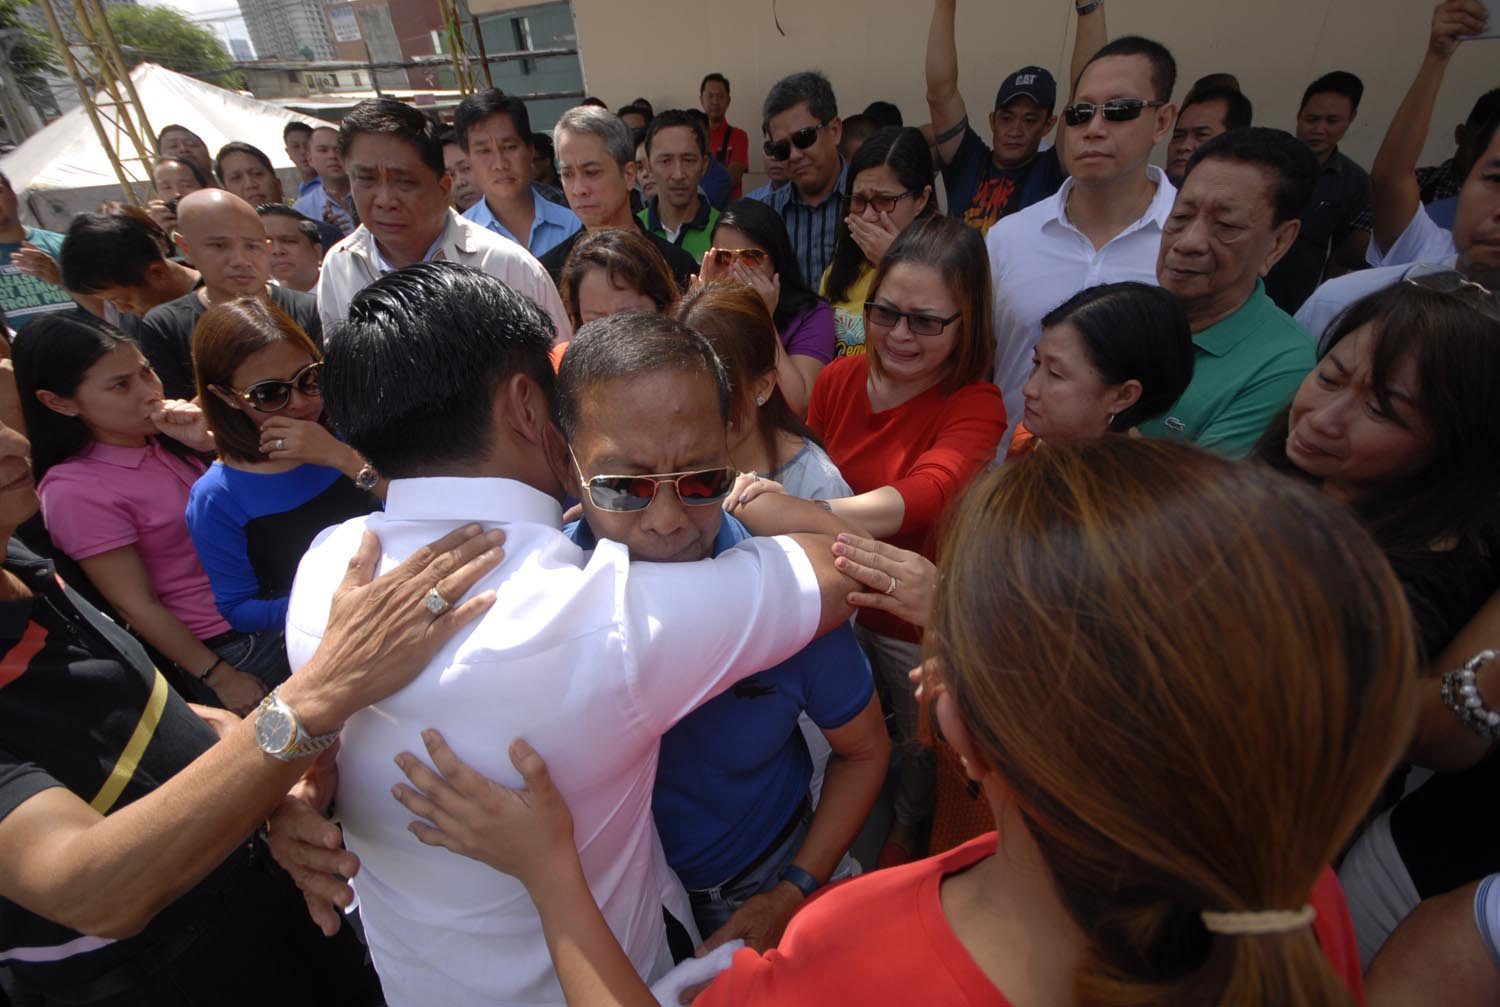 IN TEARS. Binay loyalists cry on July 1 as Makati Mayor Junjun Binay hugs his father after announcing before a crowd at the city hall quadrangle that he was stepping down as mayor and complying with the Ombudsman's preventive suspension order. Photo by Joel Leporada/Rappler  